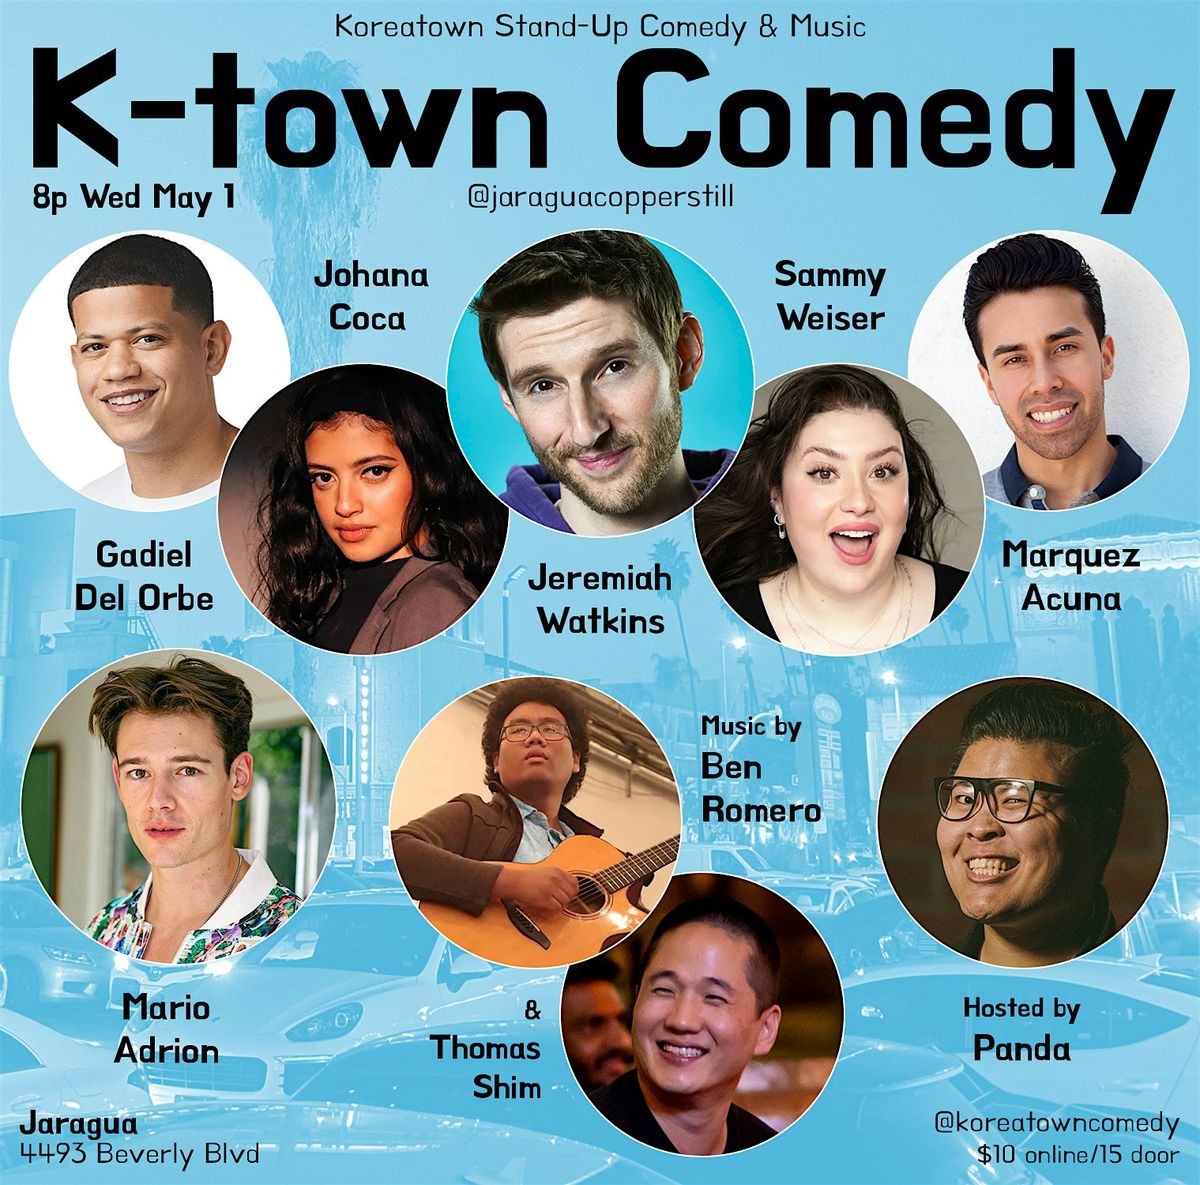 K-town Comedy May 1 Wed 8pm at Jaragua! LIVE stand-up comedy and music.